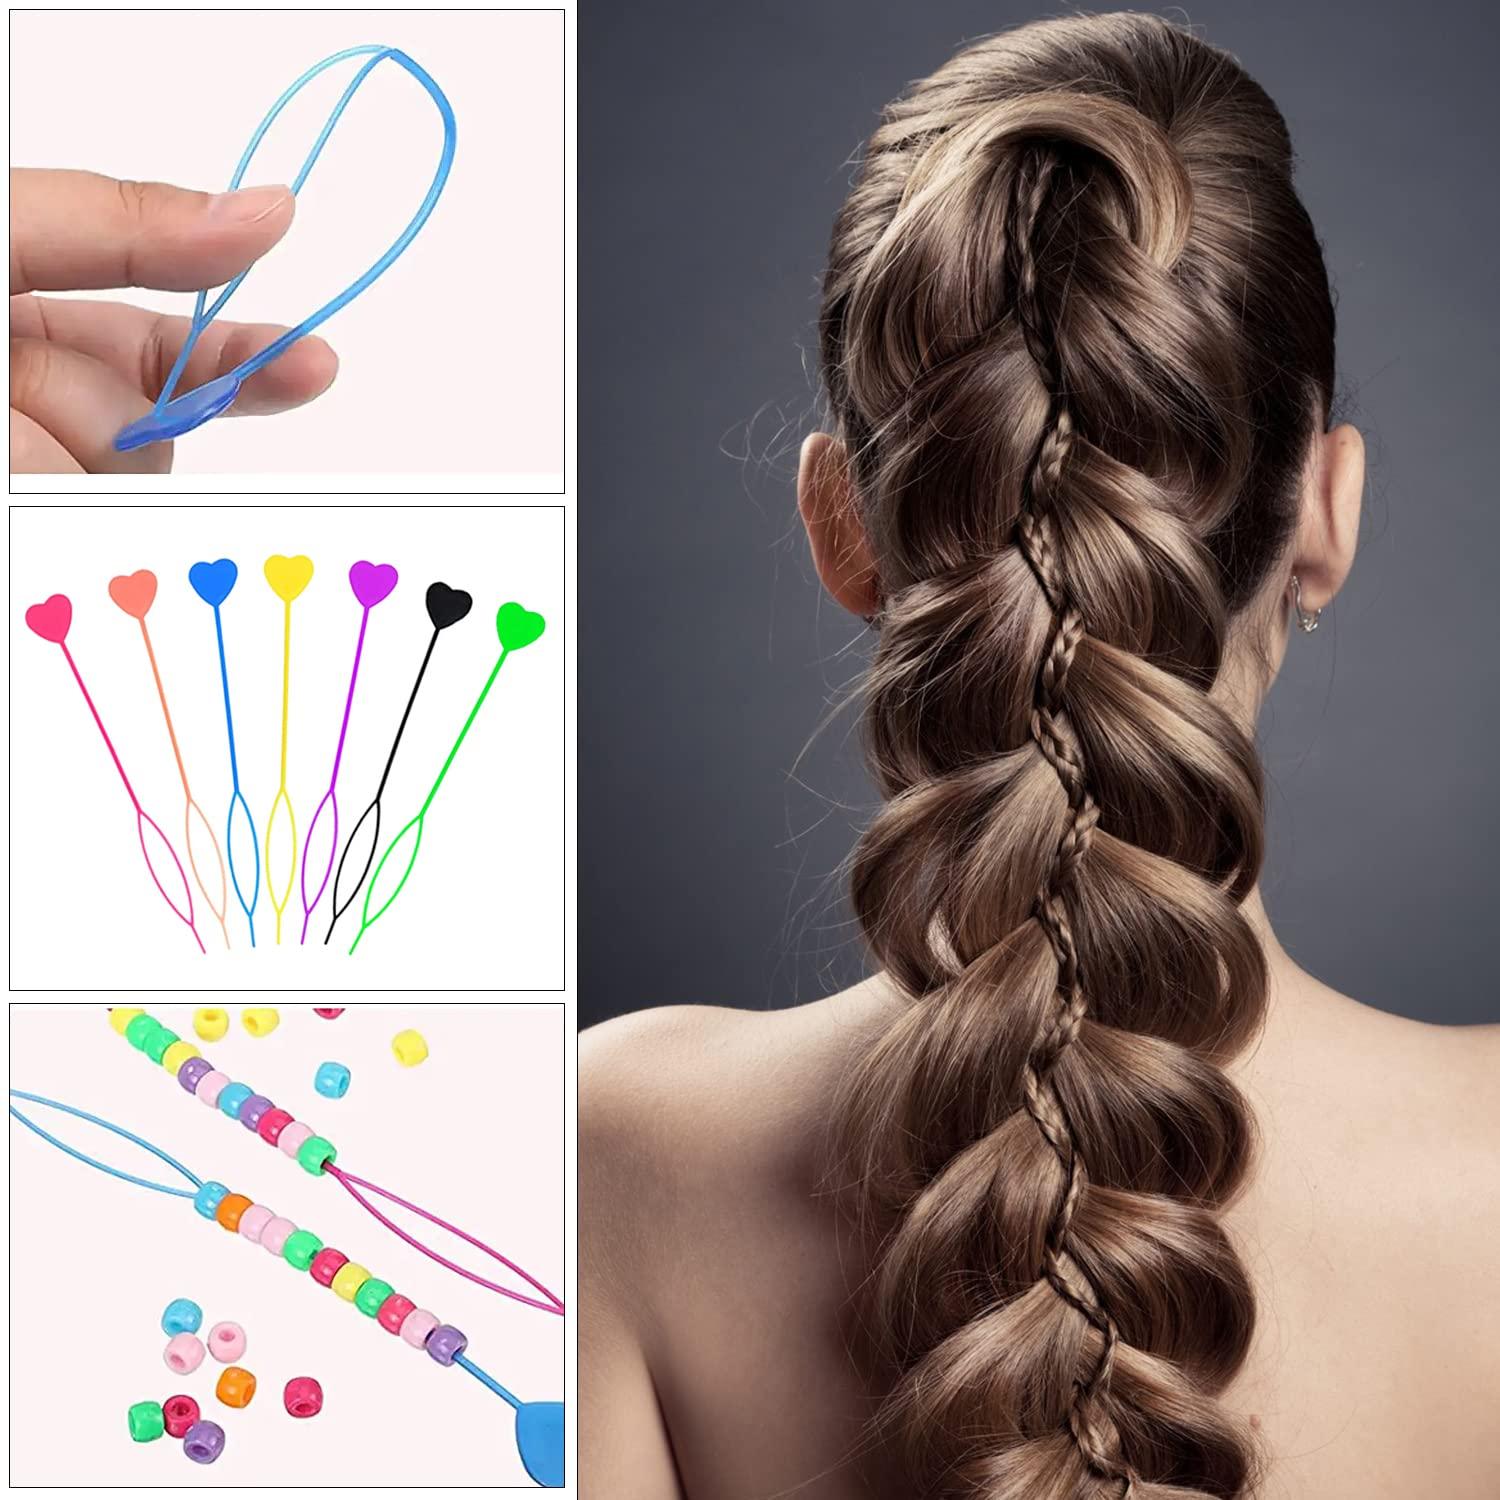 20 Pcs Quick Beader for Hair Braids Hair Beader Tools for Loading Beads on  Hair Braids Ponytail Maker Styling Tool Beader for Kids Girls and Women  with 200 Pcs Elastic Rubber Bands